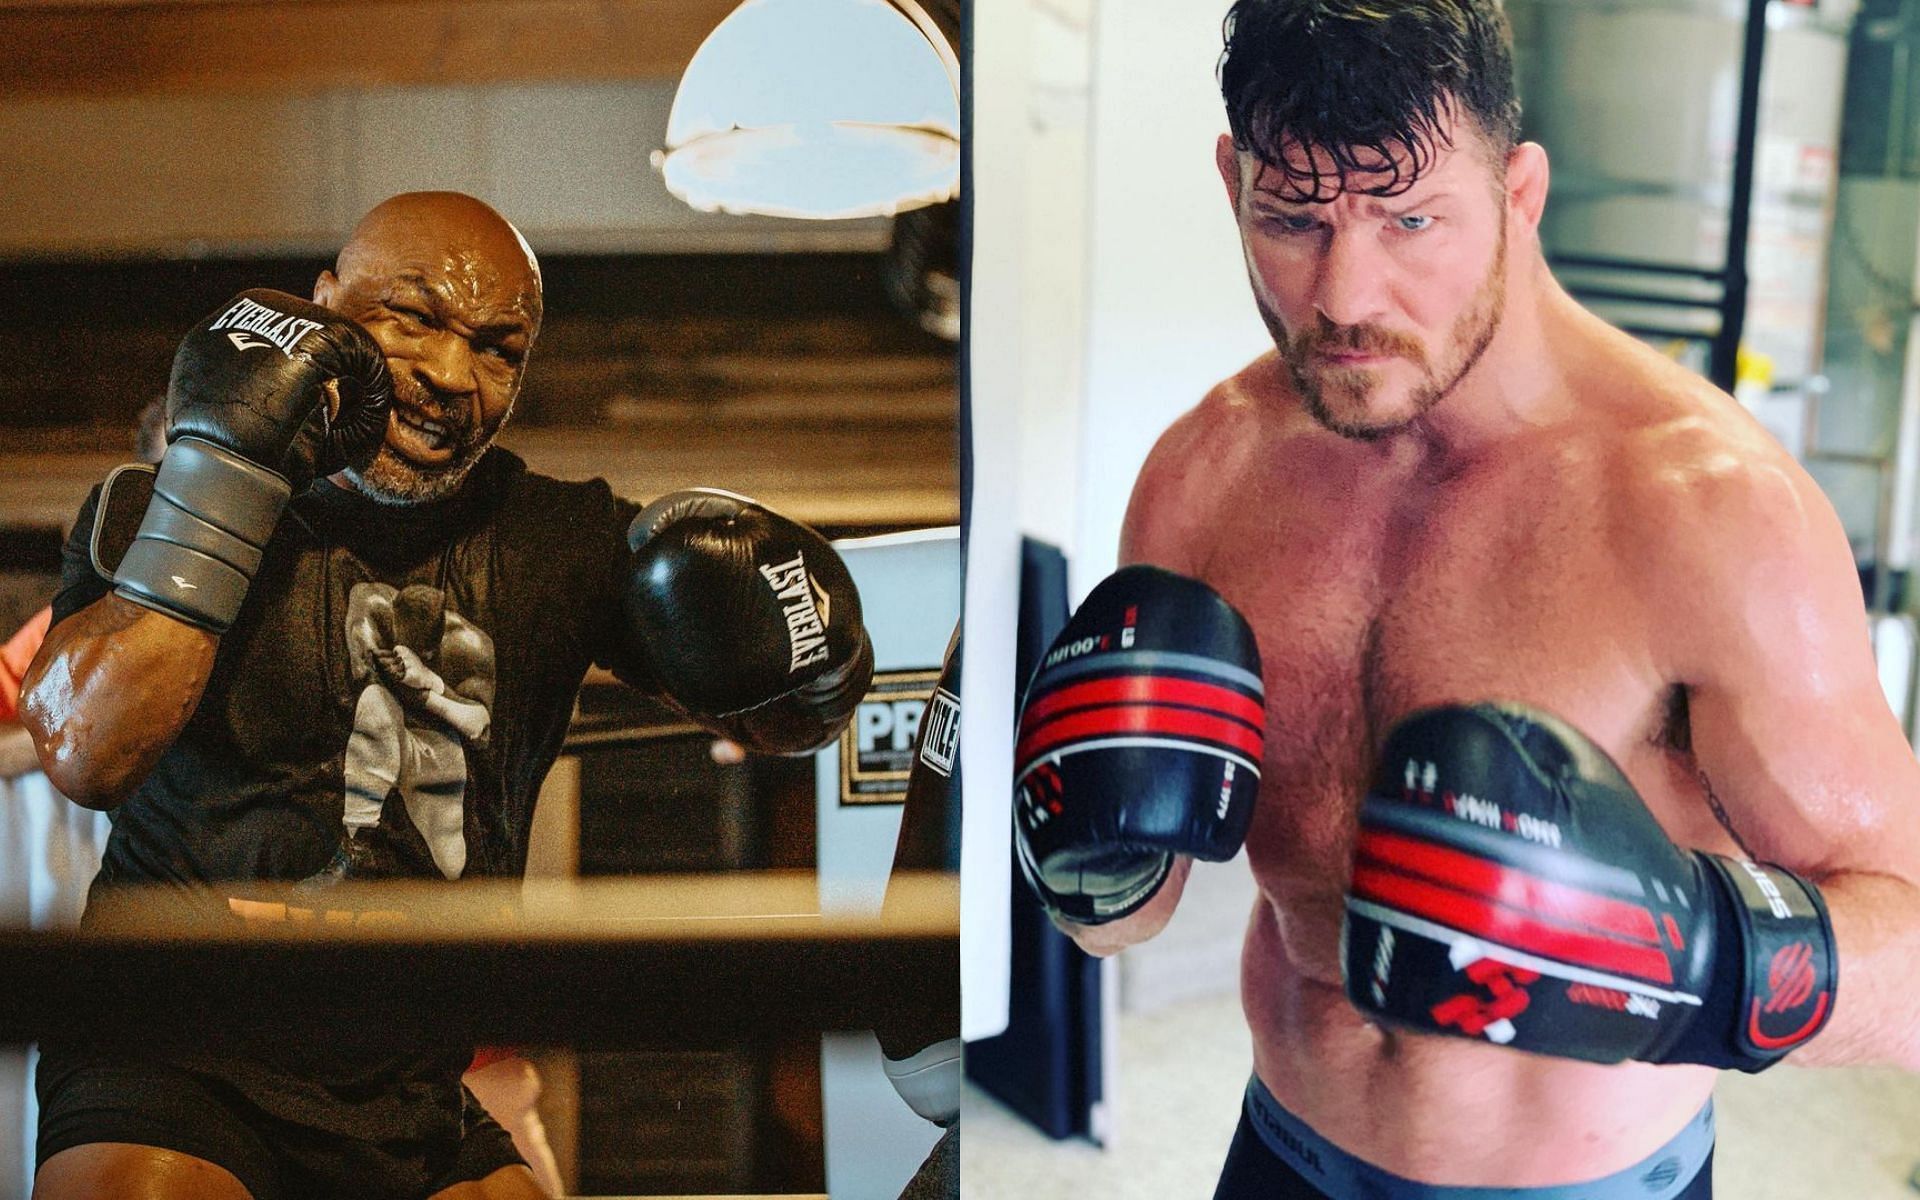 Mike Tyson (left) and Michael Bisping (right) [Images courtesy of @miketyson Instagram and @bisping Instagram]